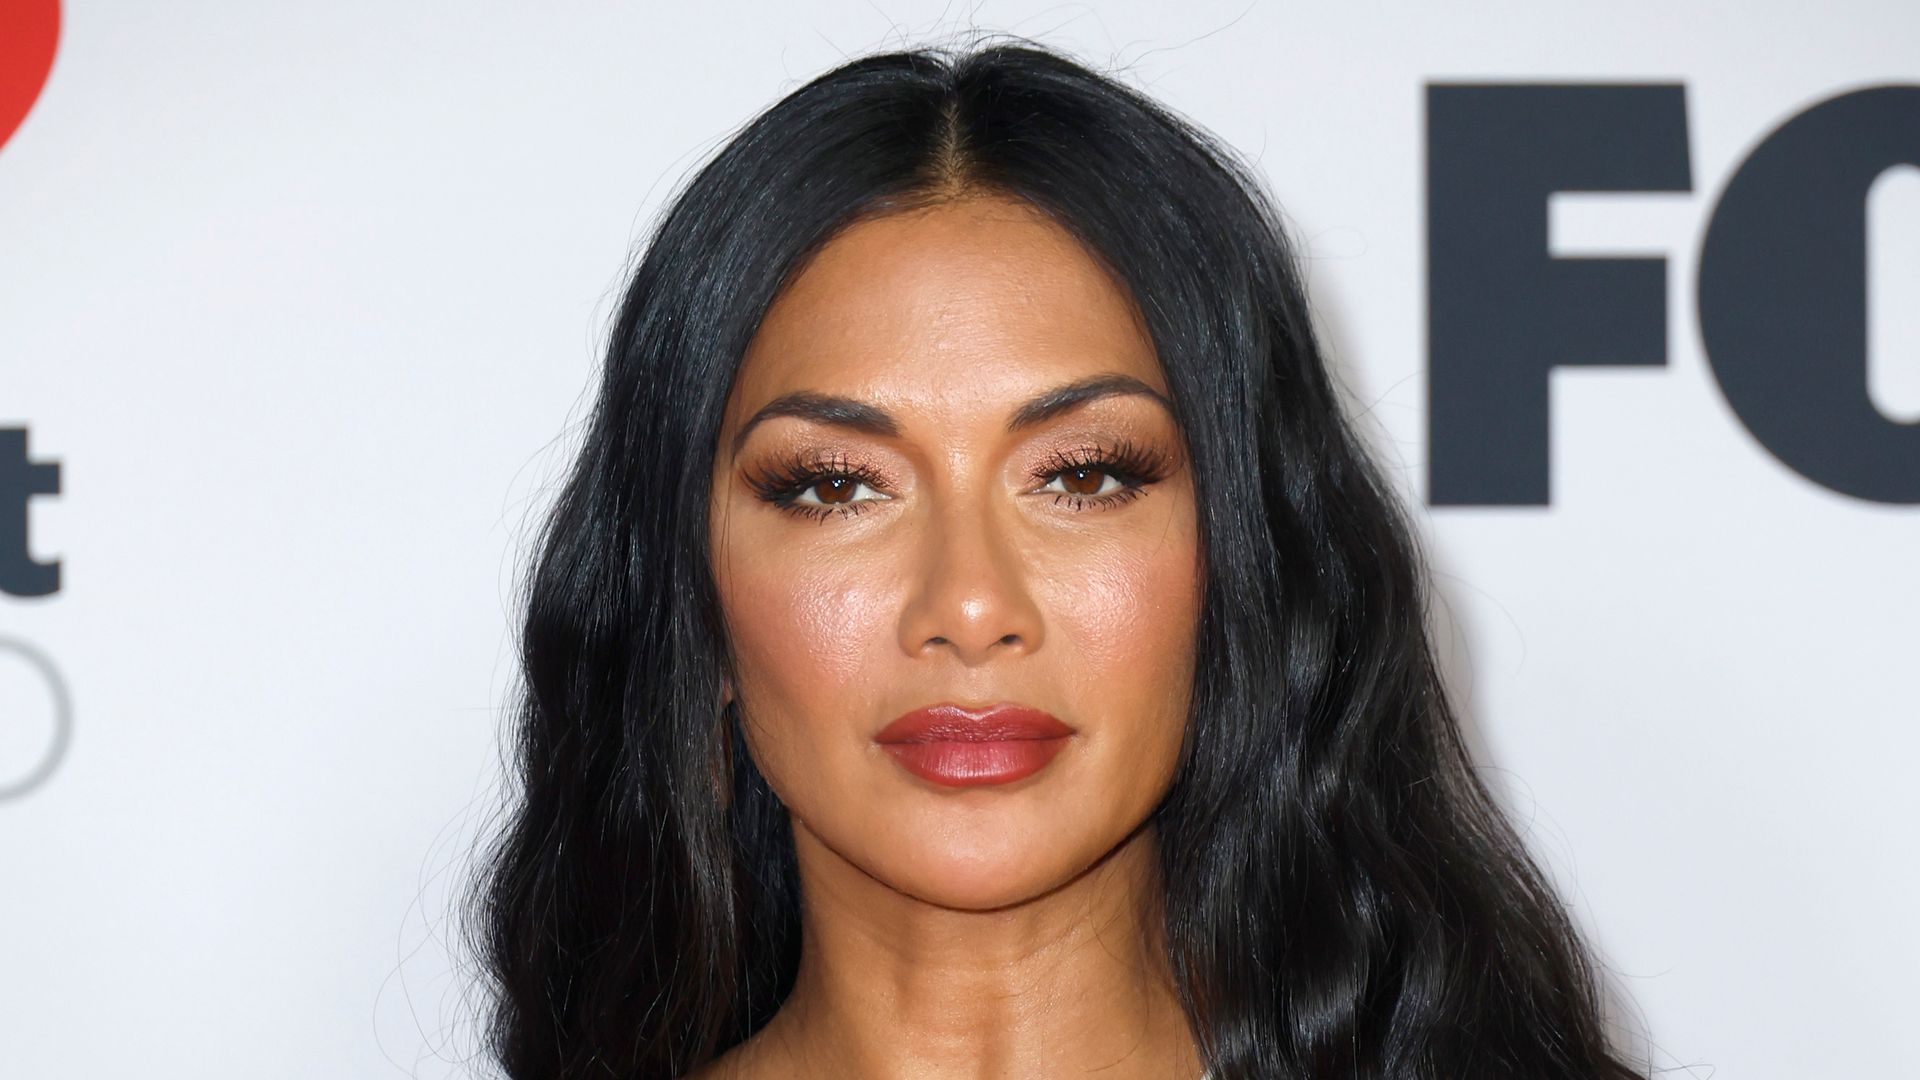 Nicole Scherzinger poses in the press room at the 2022 iHeartRadio Music Awards at The Shrine Auditorium in Los Angeles, California on March 22, 2022. 